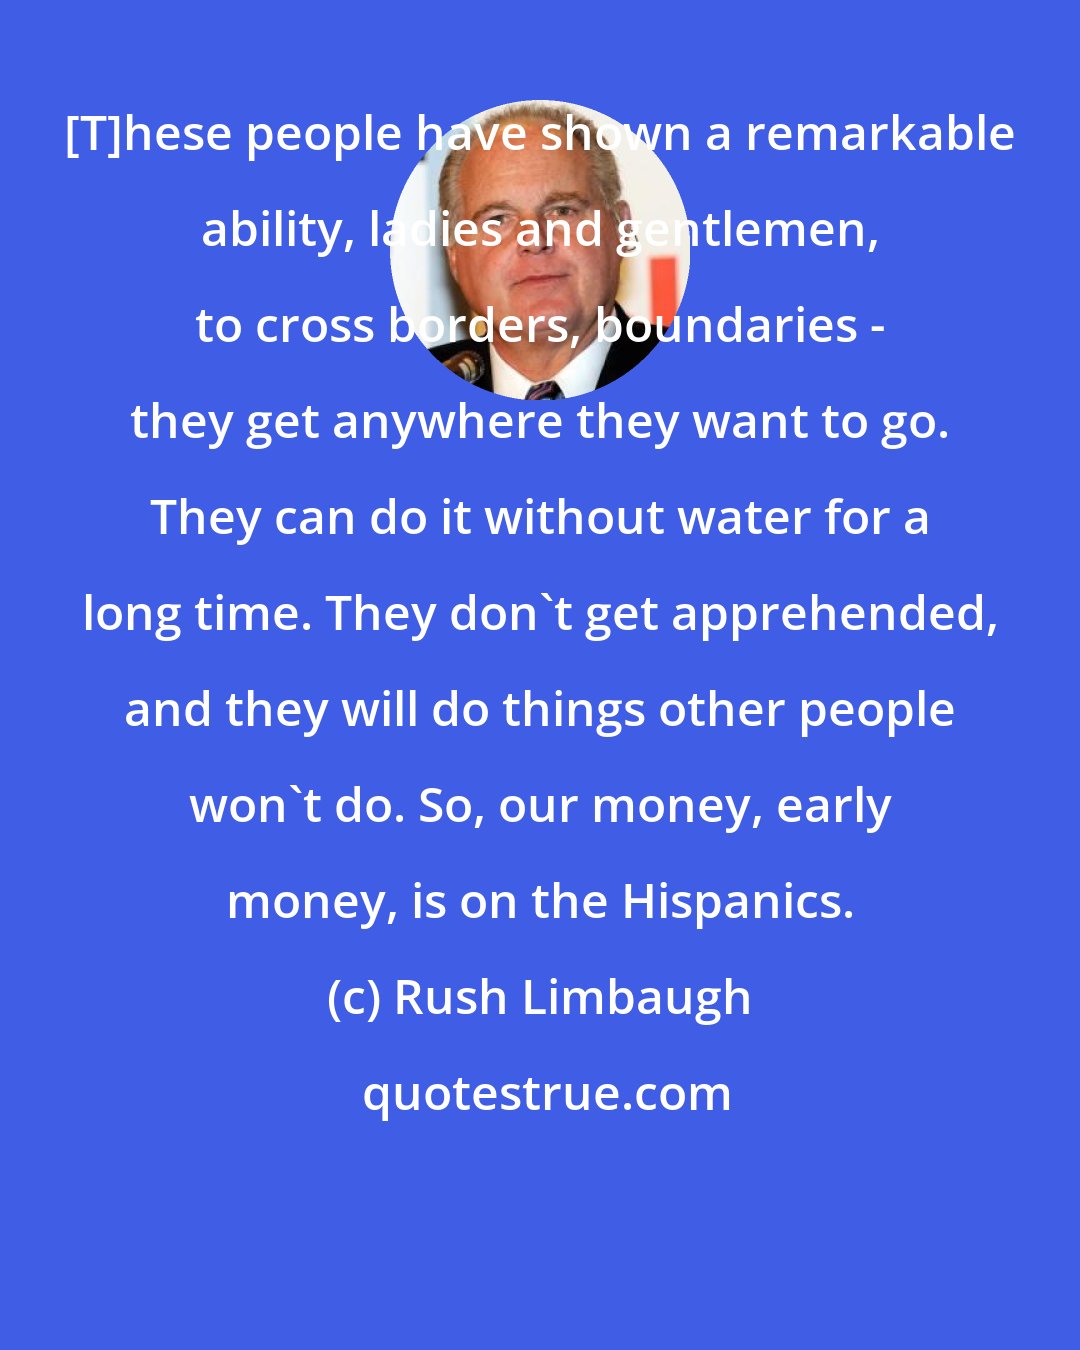 Rush Limbaugh: [T]hese people have shown a remarkable ability, ladies and gentlemen, to cross borders, boundaries - they get anywhere they want to go. They can do it without water for a long time. They don't get apprehended, and they will do things other people won't do. So, our money, early money, is on the Hispanics.